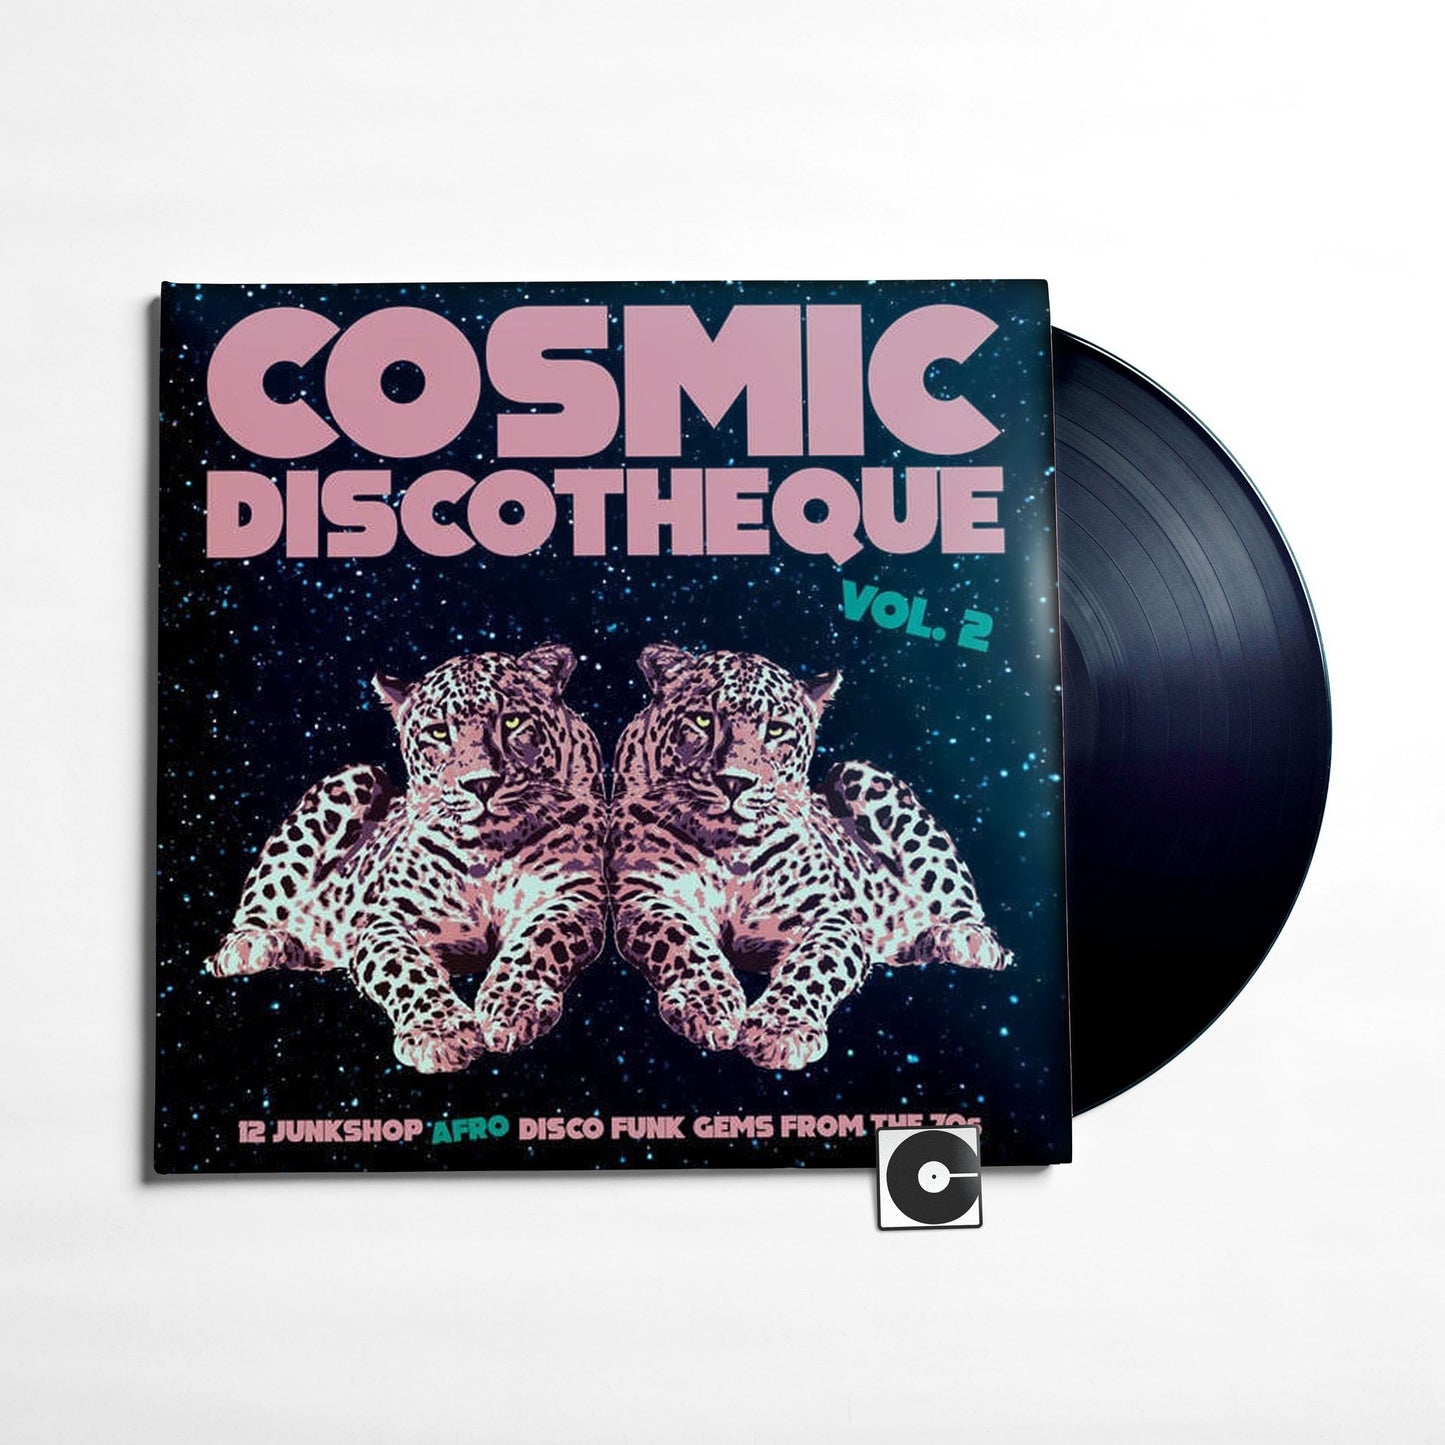 Various Artists - "Cosmic Discotheque Vol 2: 12 Junkshop Afro Disco Funk Gems From The 70's"